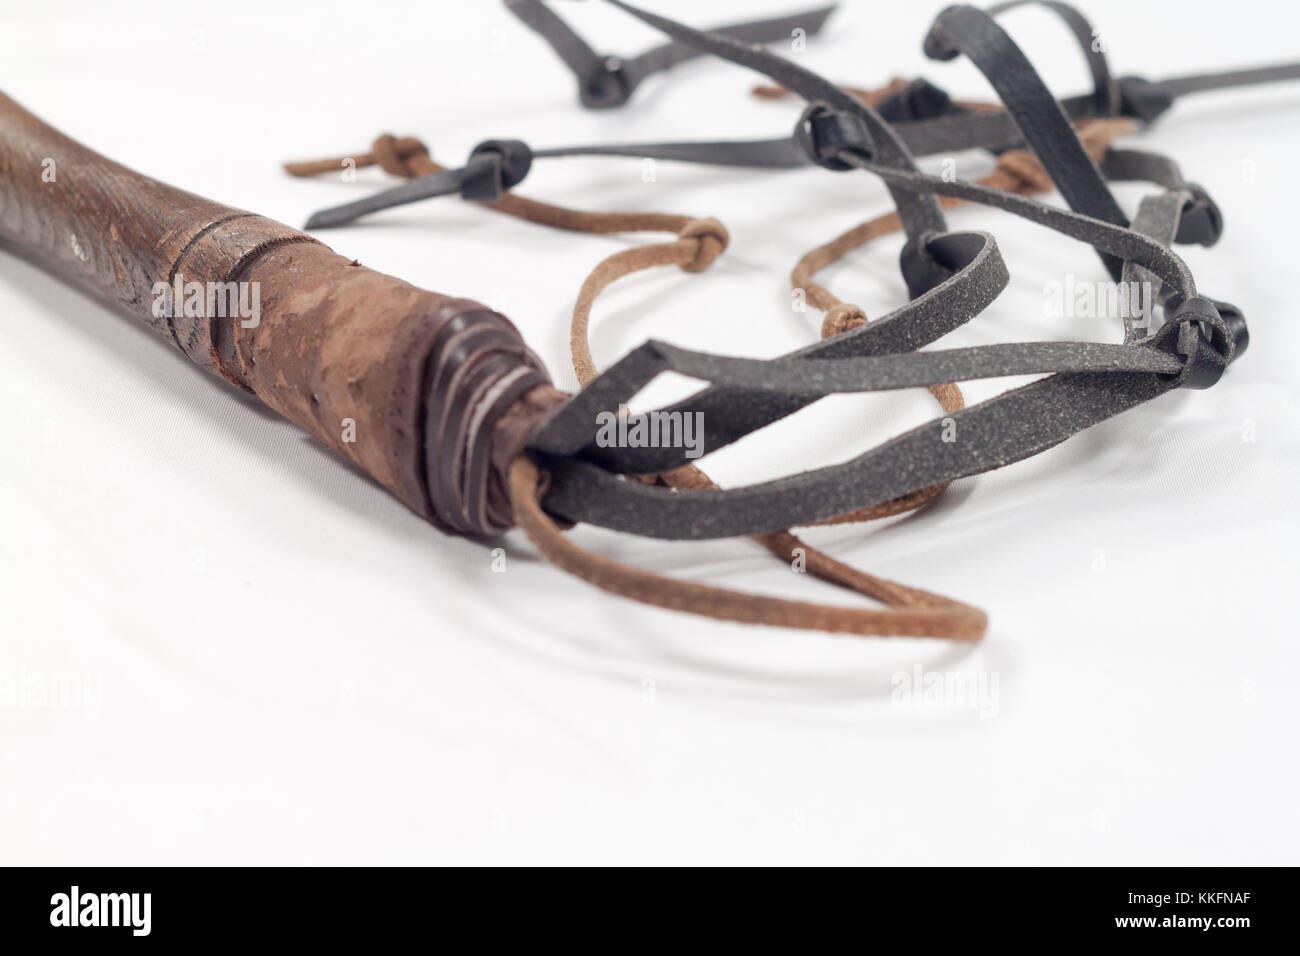 Cat-o-Nine-Tails Whip as used to torture Jesus Christ in the Easter Passion Story before his Crucifixion Stock Photo